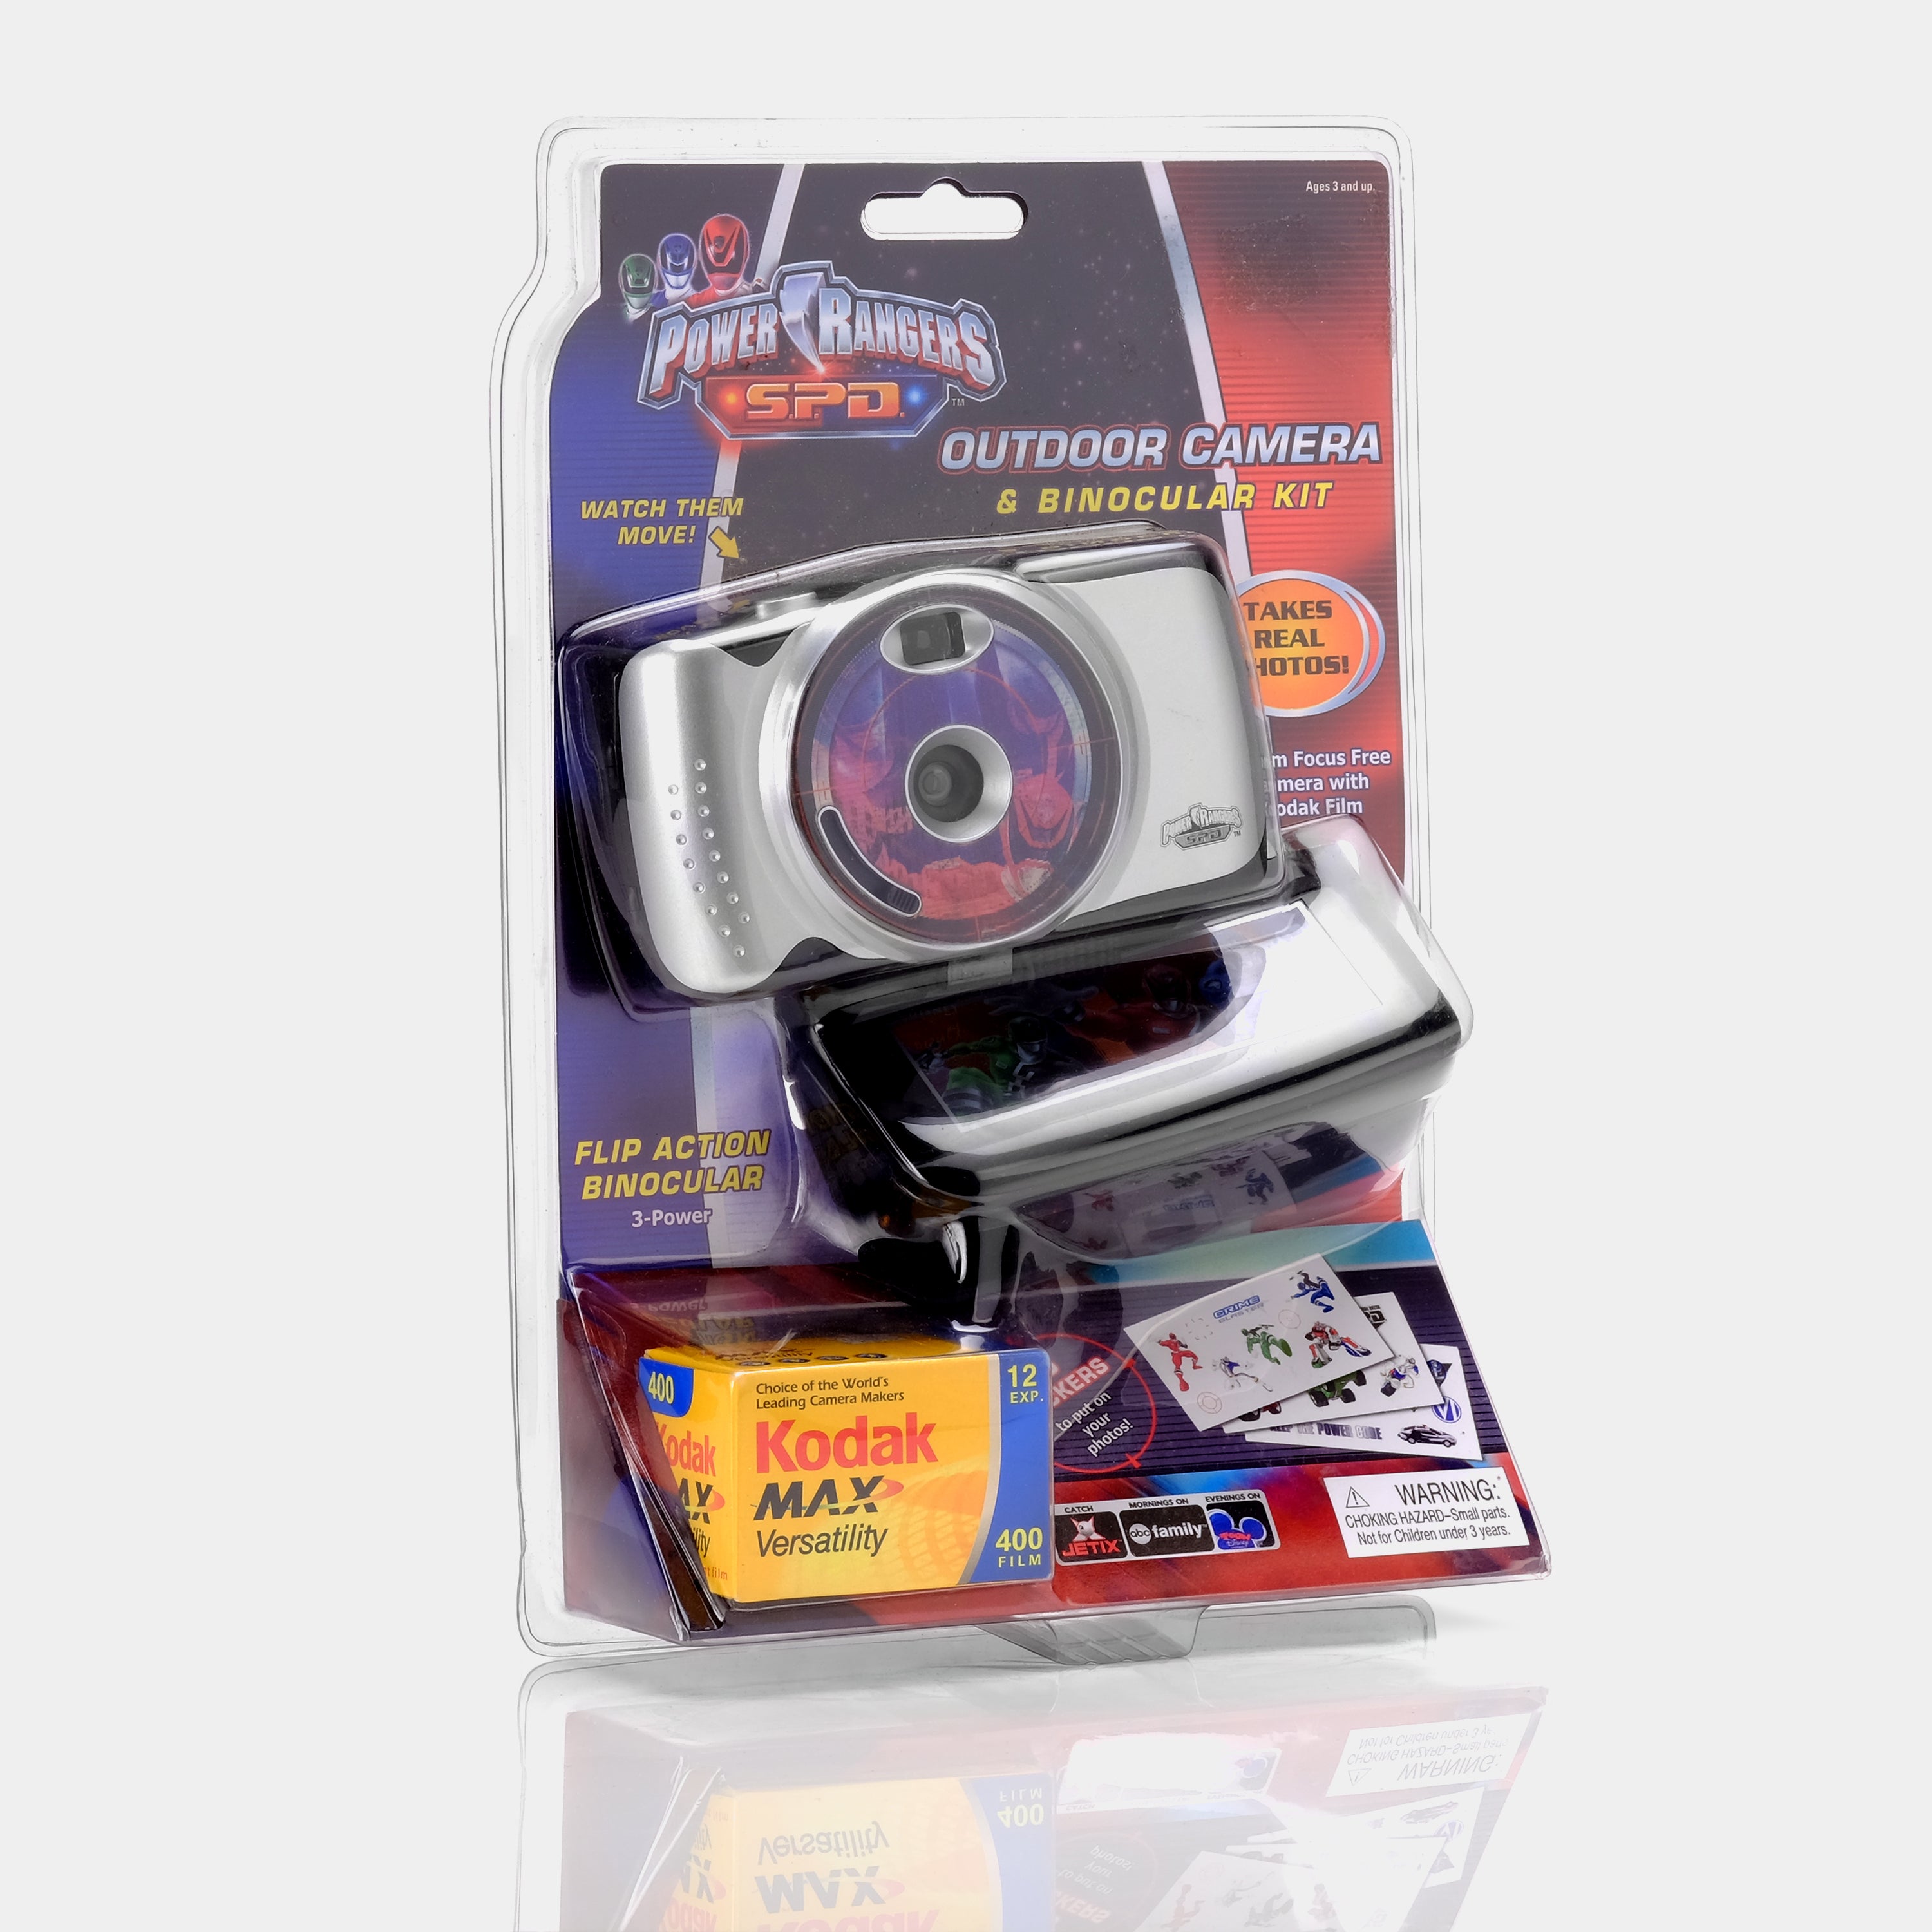 Power Rangers S.P.D. 35mm Point and Shoot Film Camera (New In Packaging)